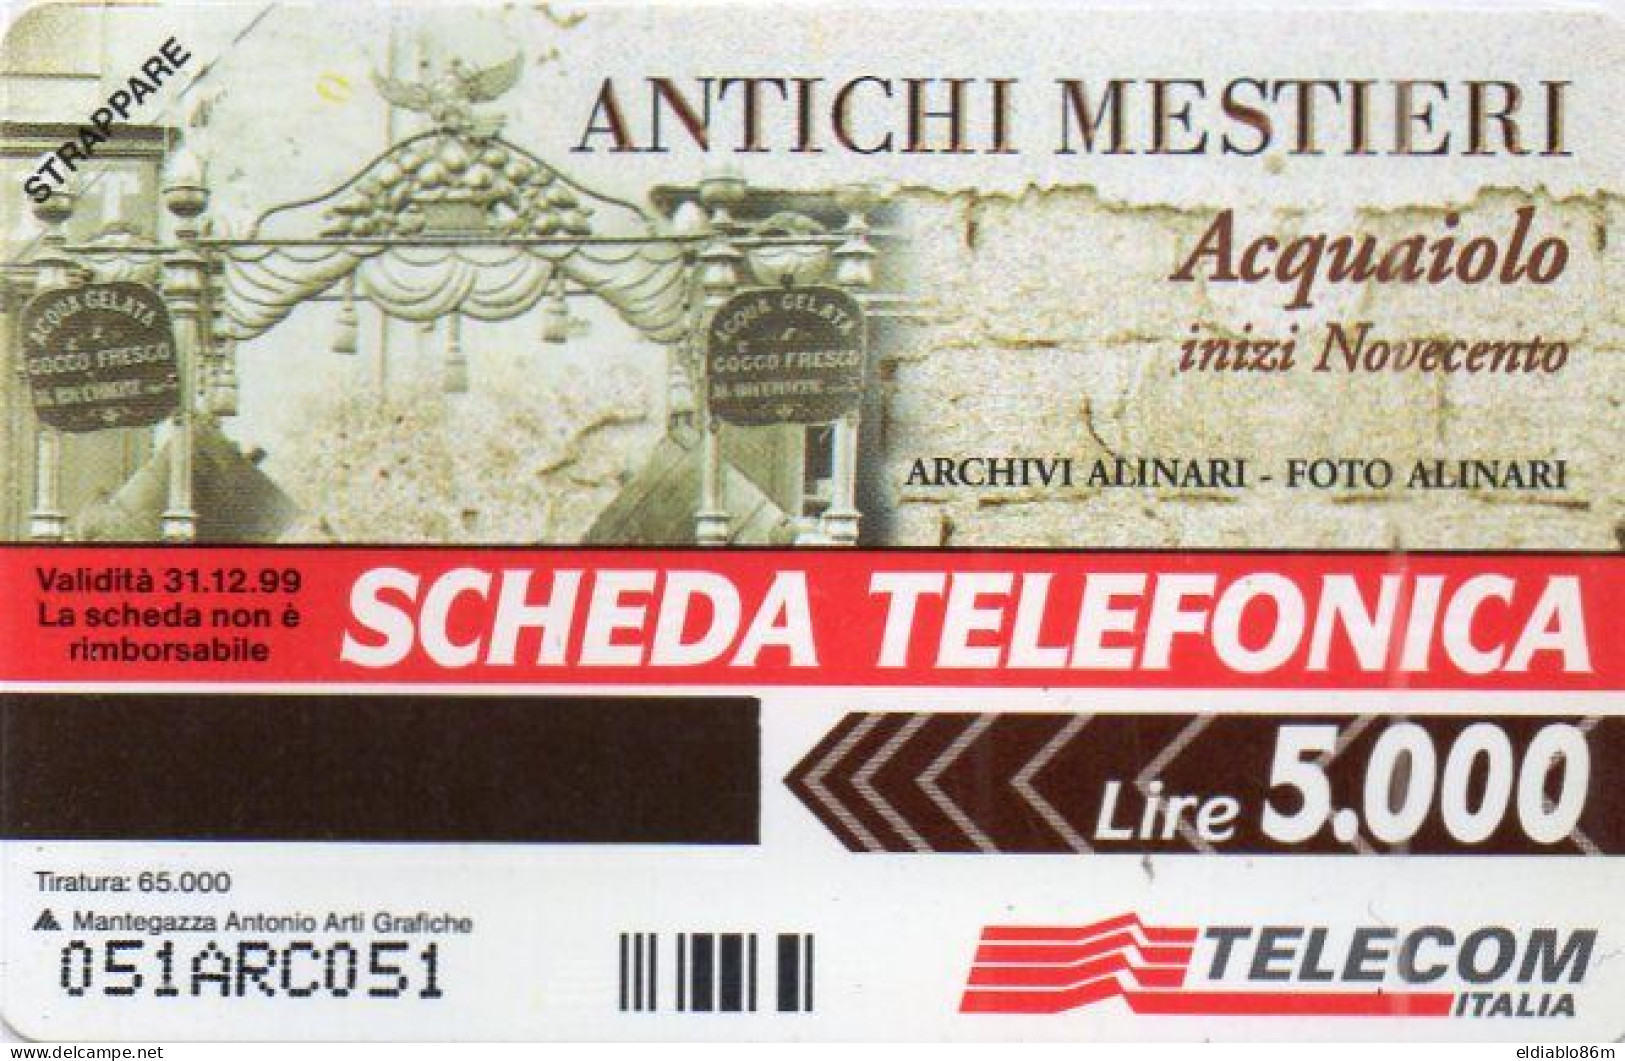 ITALY - URMET - ARC CARD (FOR INTERNAL TELECOM ARCHIVES) - SEE BATCH NUMBER - 200ex - MINT - Tests & Servizi